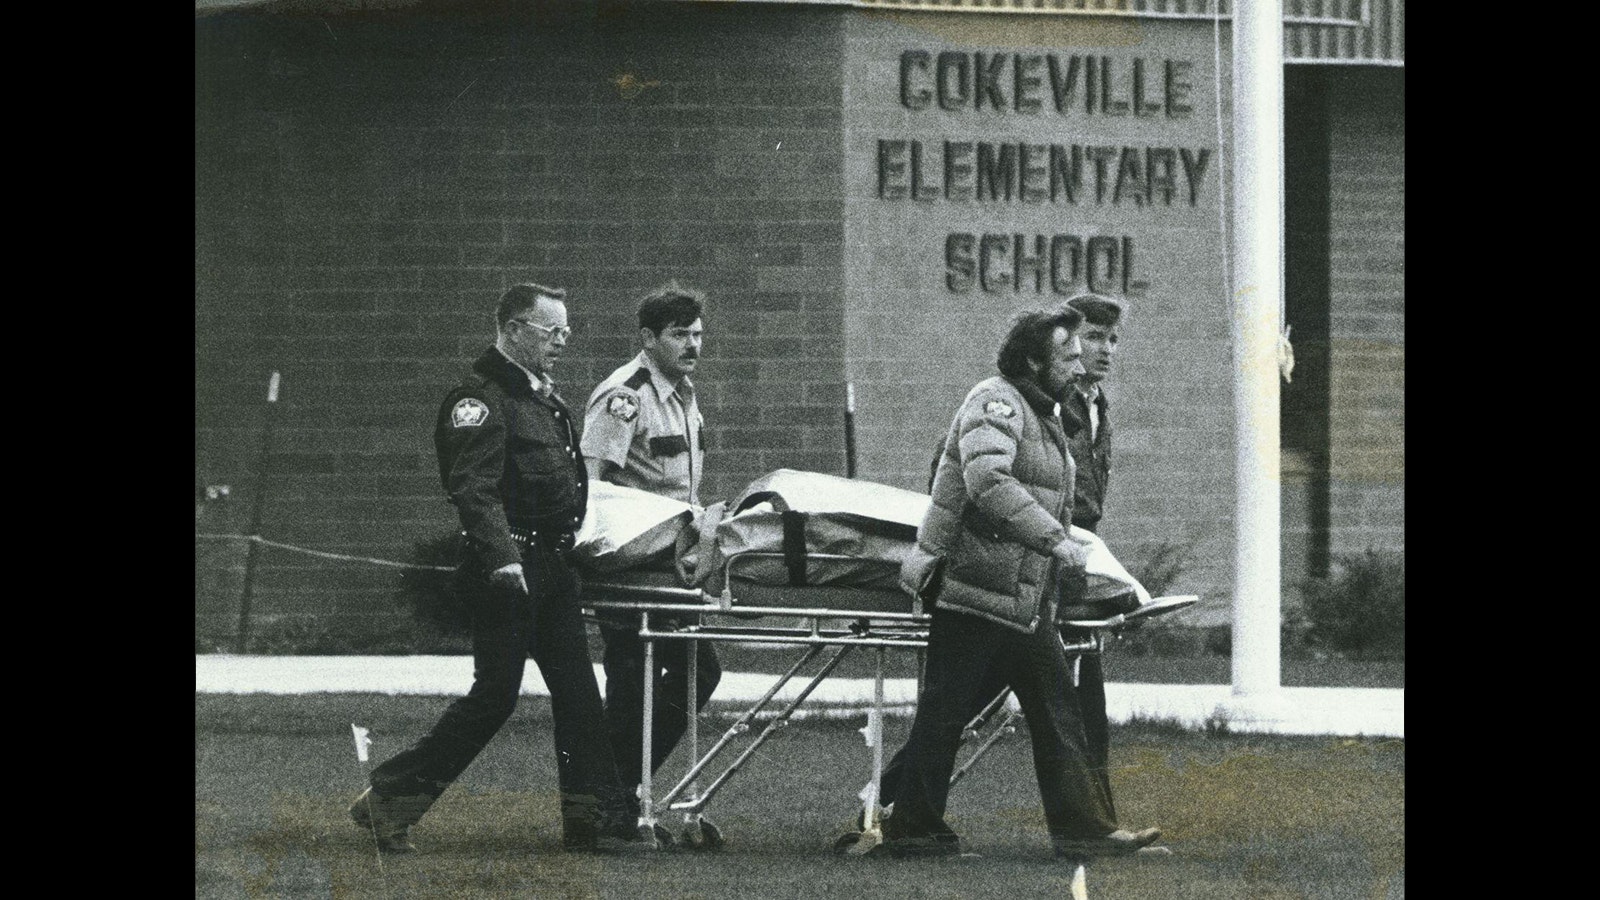 The body of Doris Young is removed by officials after the Cokeville Elementary School hostage situation on May 16 1986.